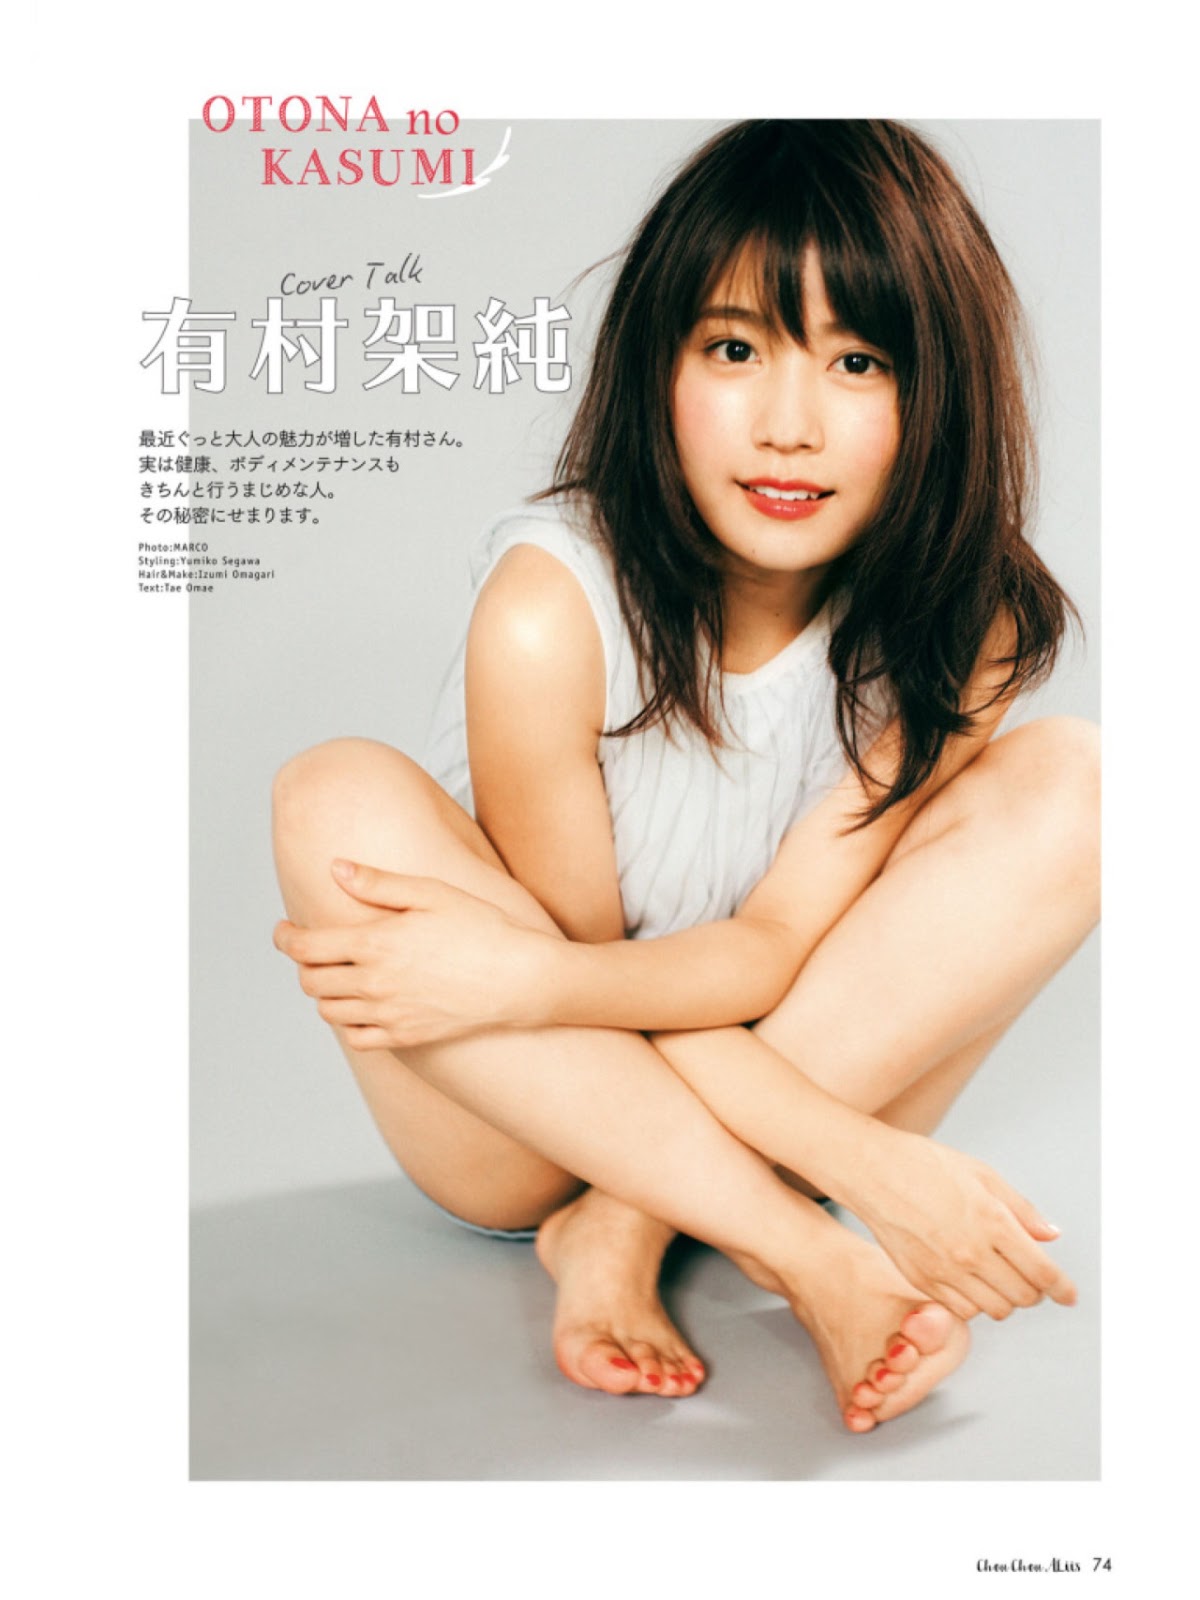 Nao Kanzaki and a few friends: Kasumi Arimura: 2016 magazine scans #1 and  other news....